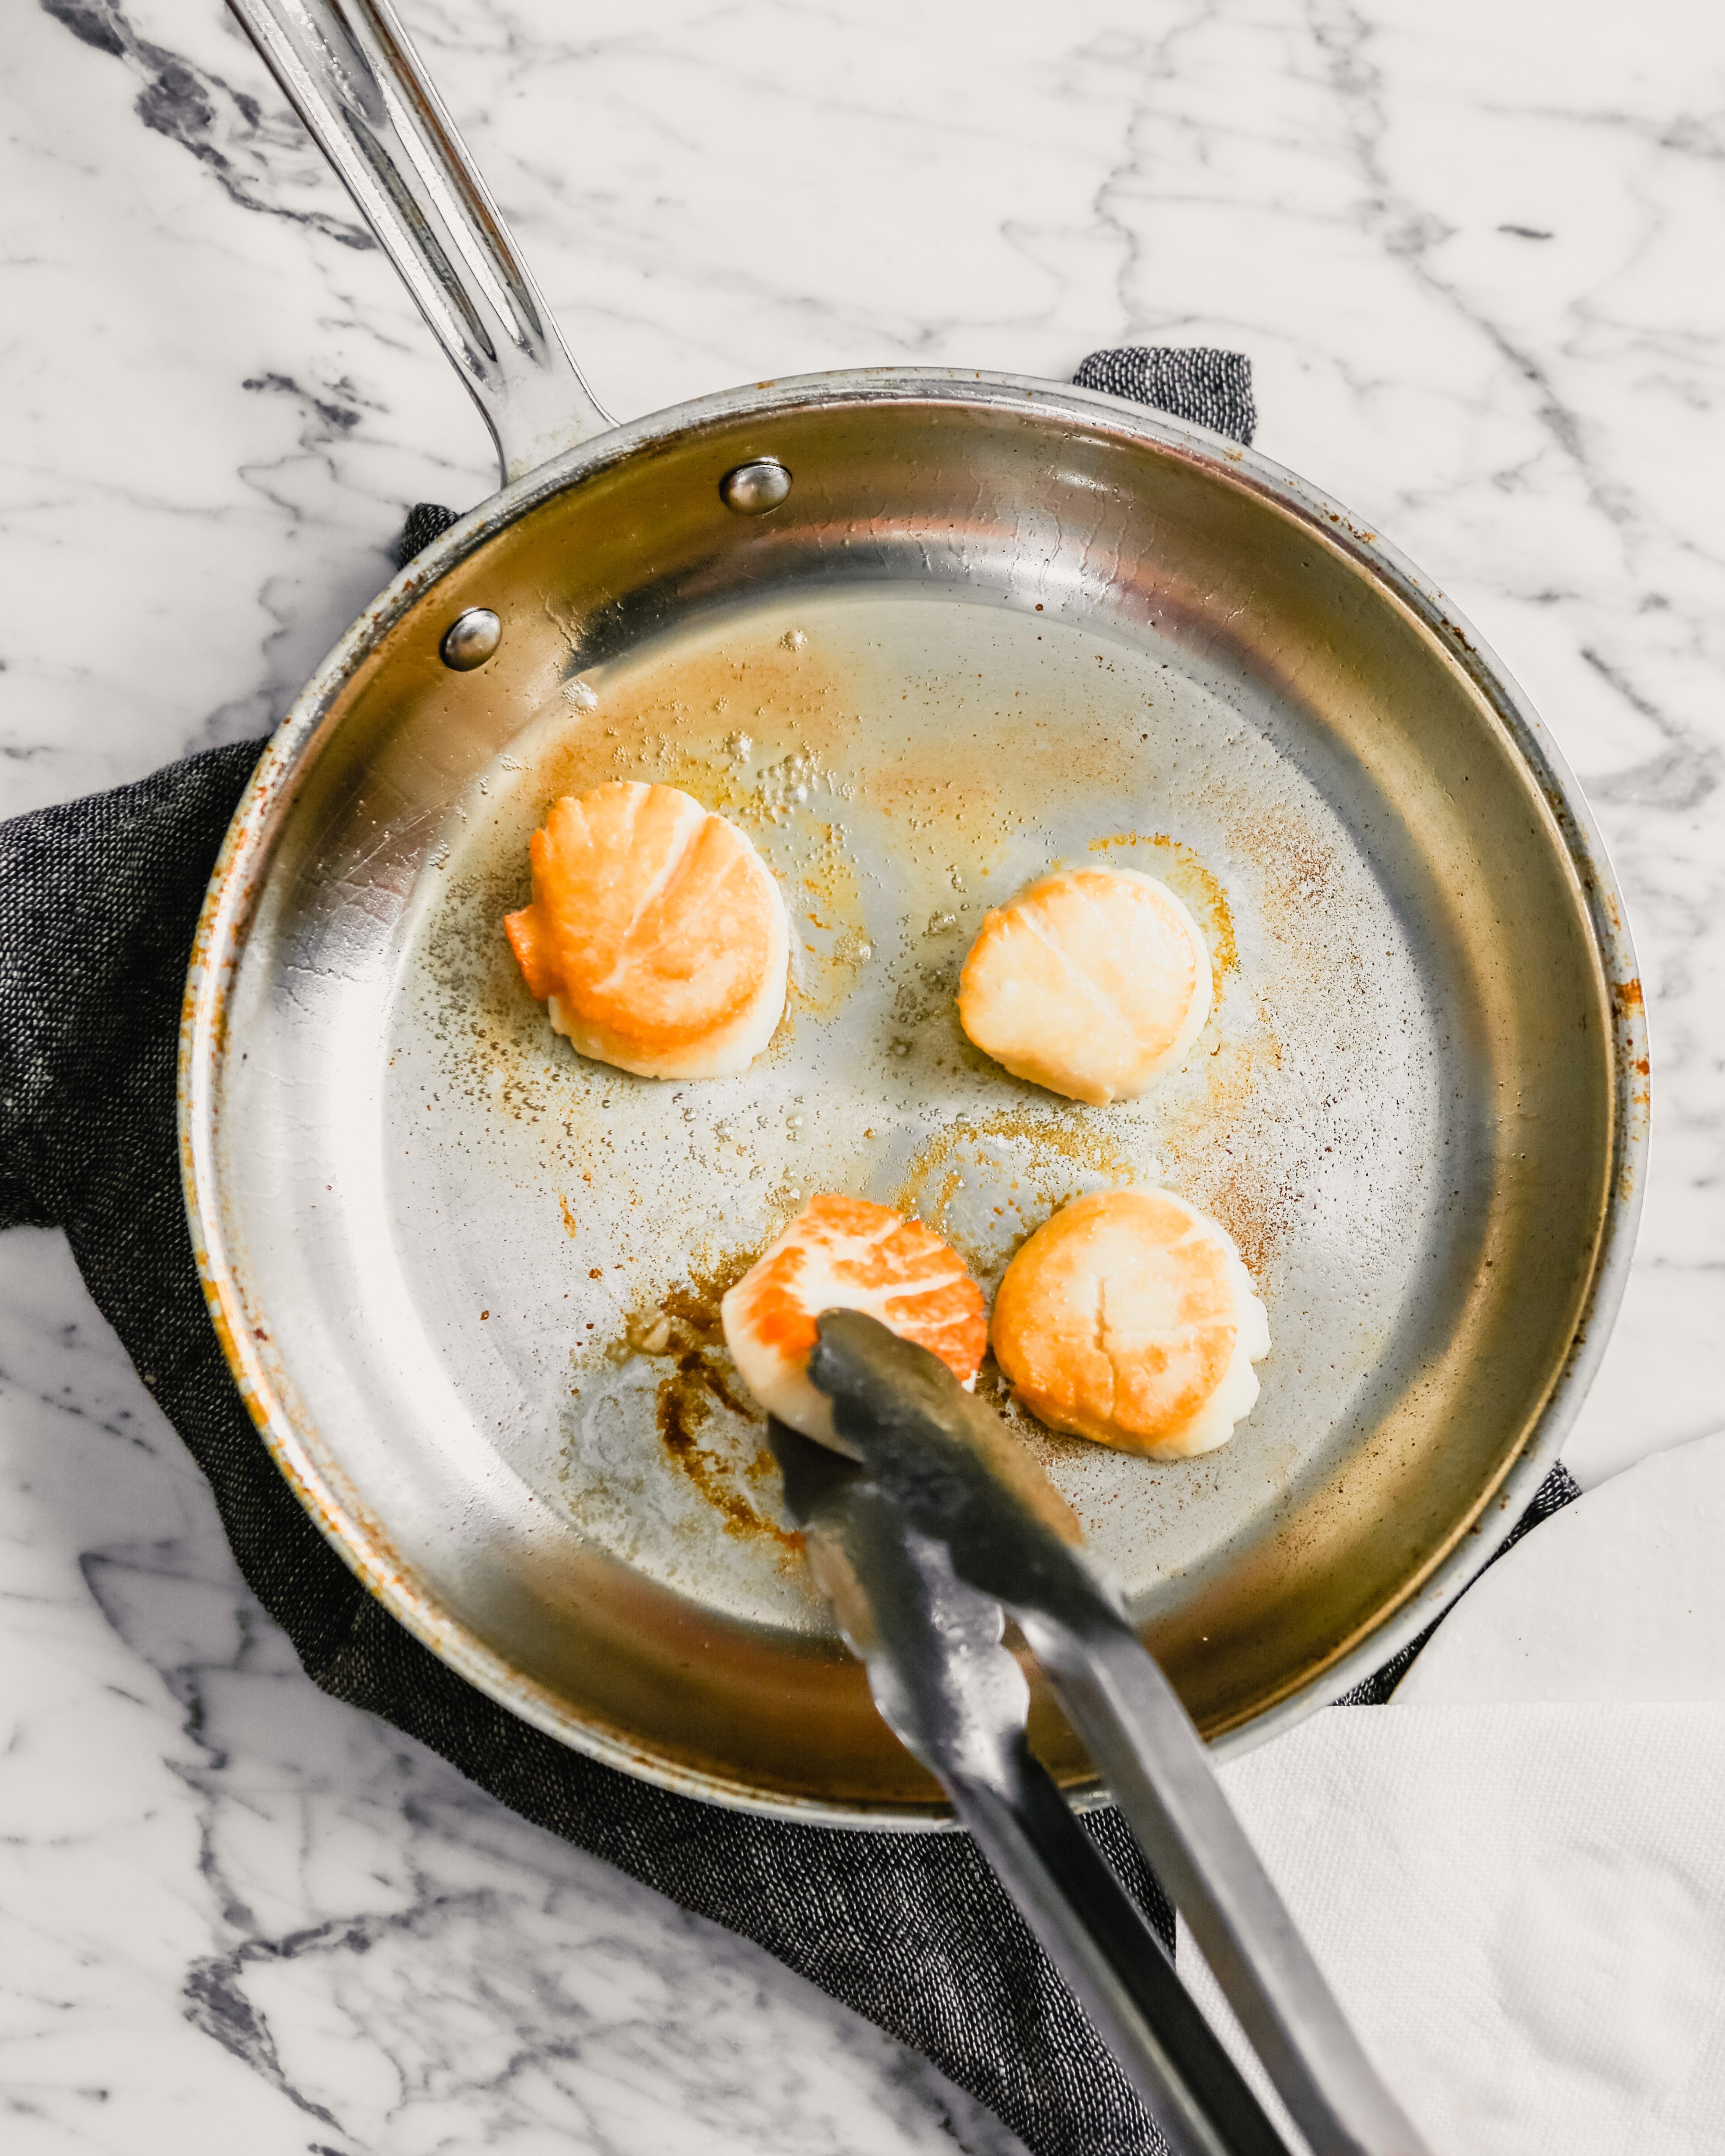 Photograph of golden brown scallops searing in a skillet.